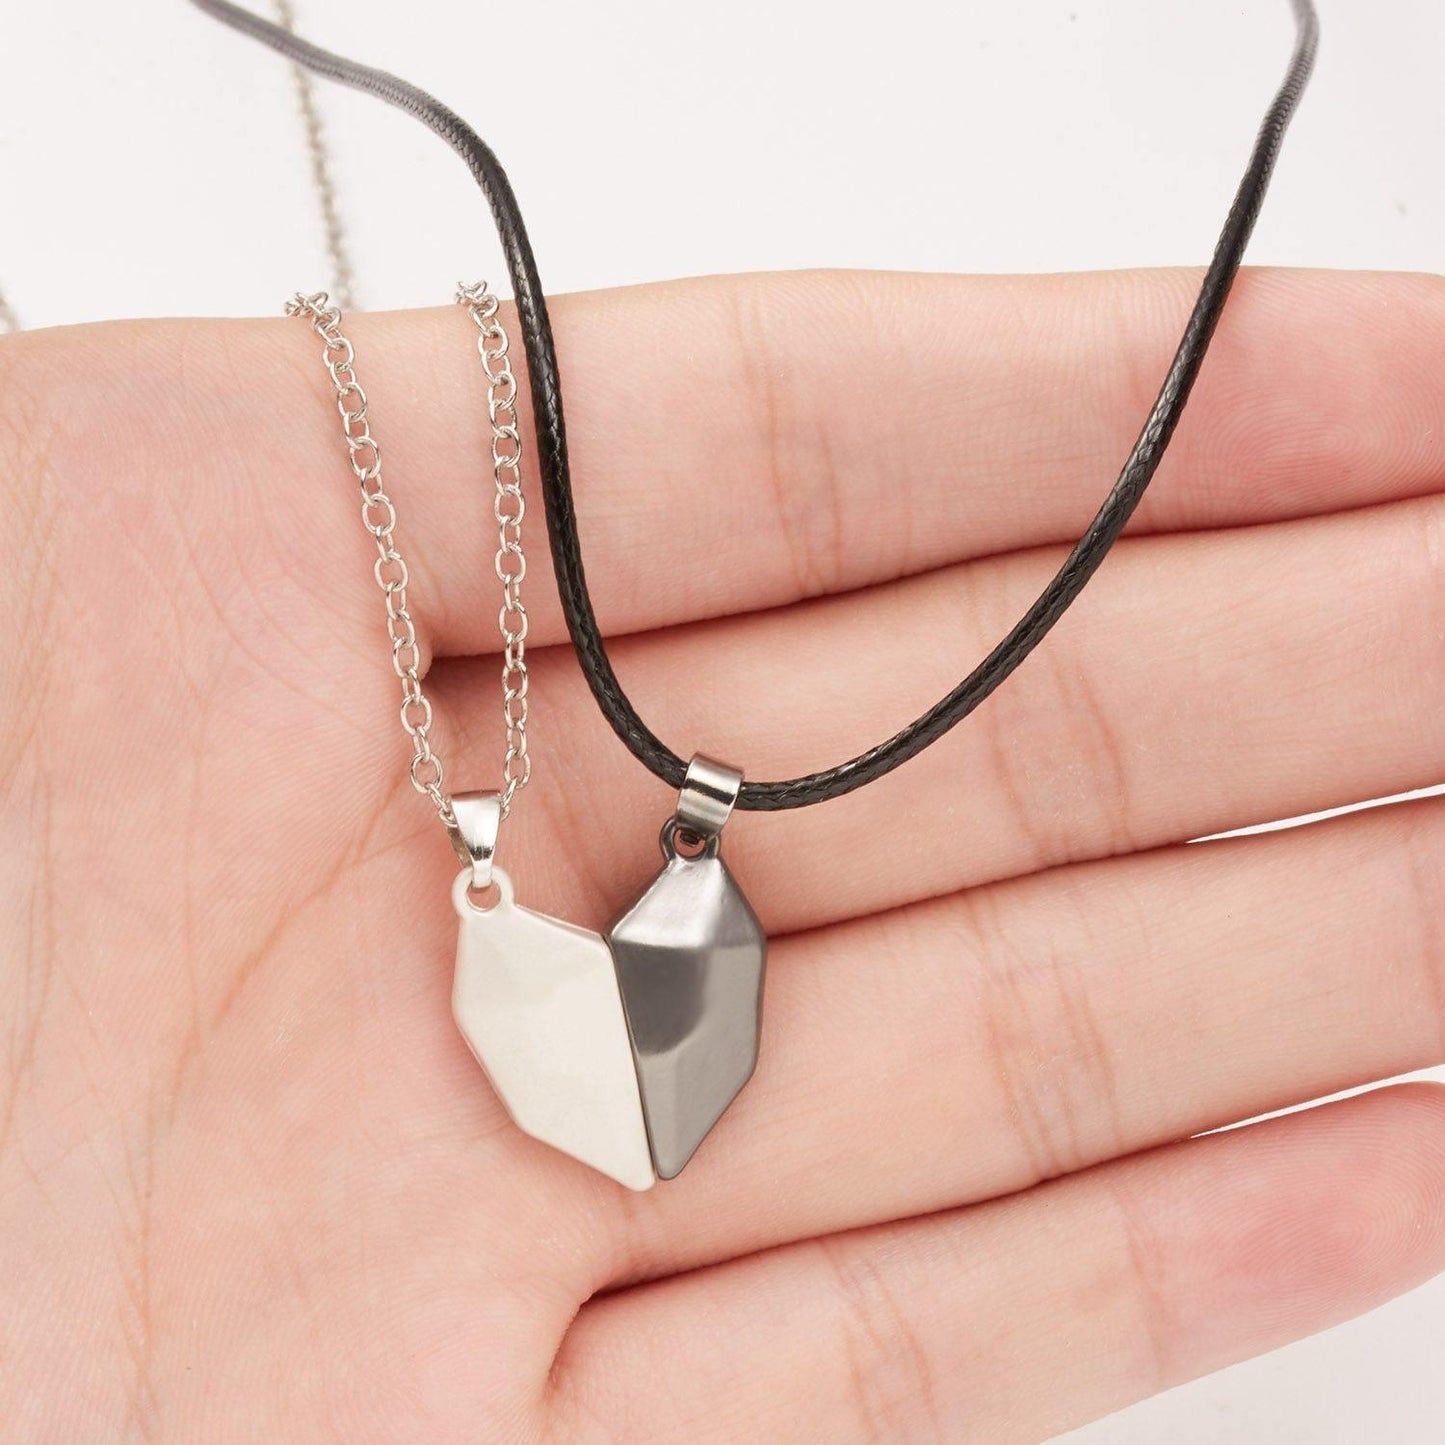 Couples Necklaces For You And The One You Love in 2023 | Couples Necklaces For You And The One You Love - undefined | Couple hugging pendant, Couple Necklace, Gift for Girlfriend, Girlfriend Gifts, girlfriend necklace, Magnetic Couple Necklace, to my girlfriend | From Hunny Life | hunnylife.com